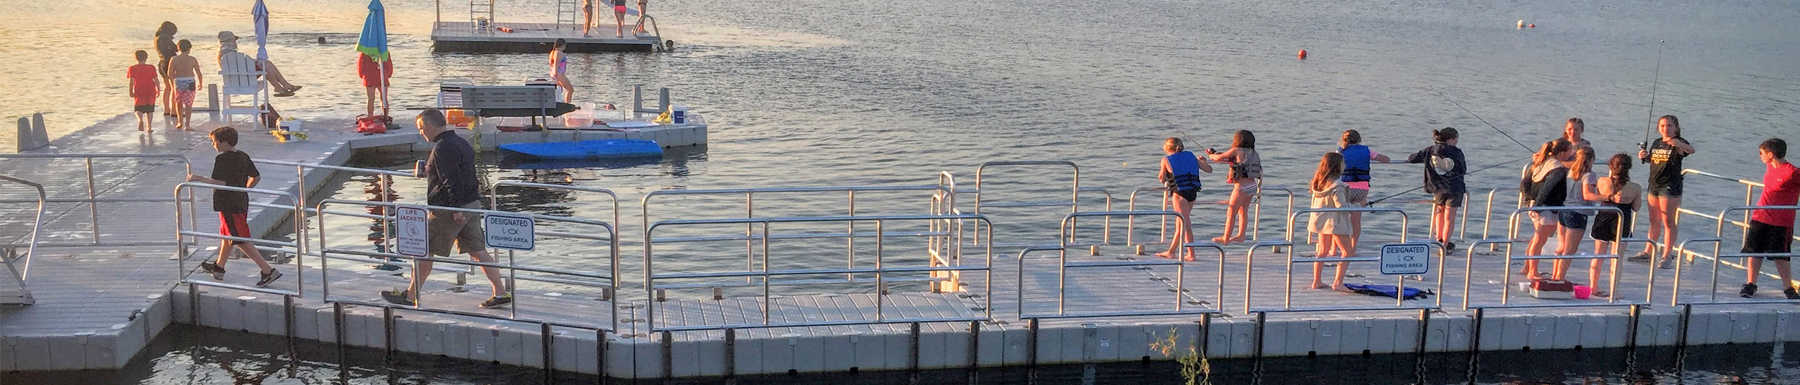 Group of people fishing on dock with railings